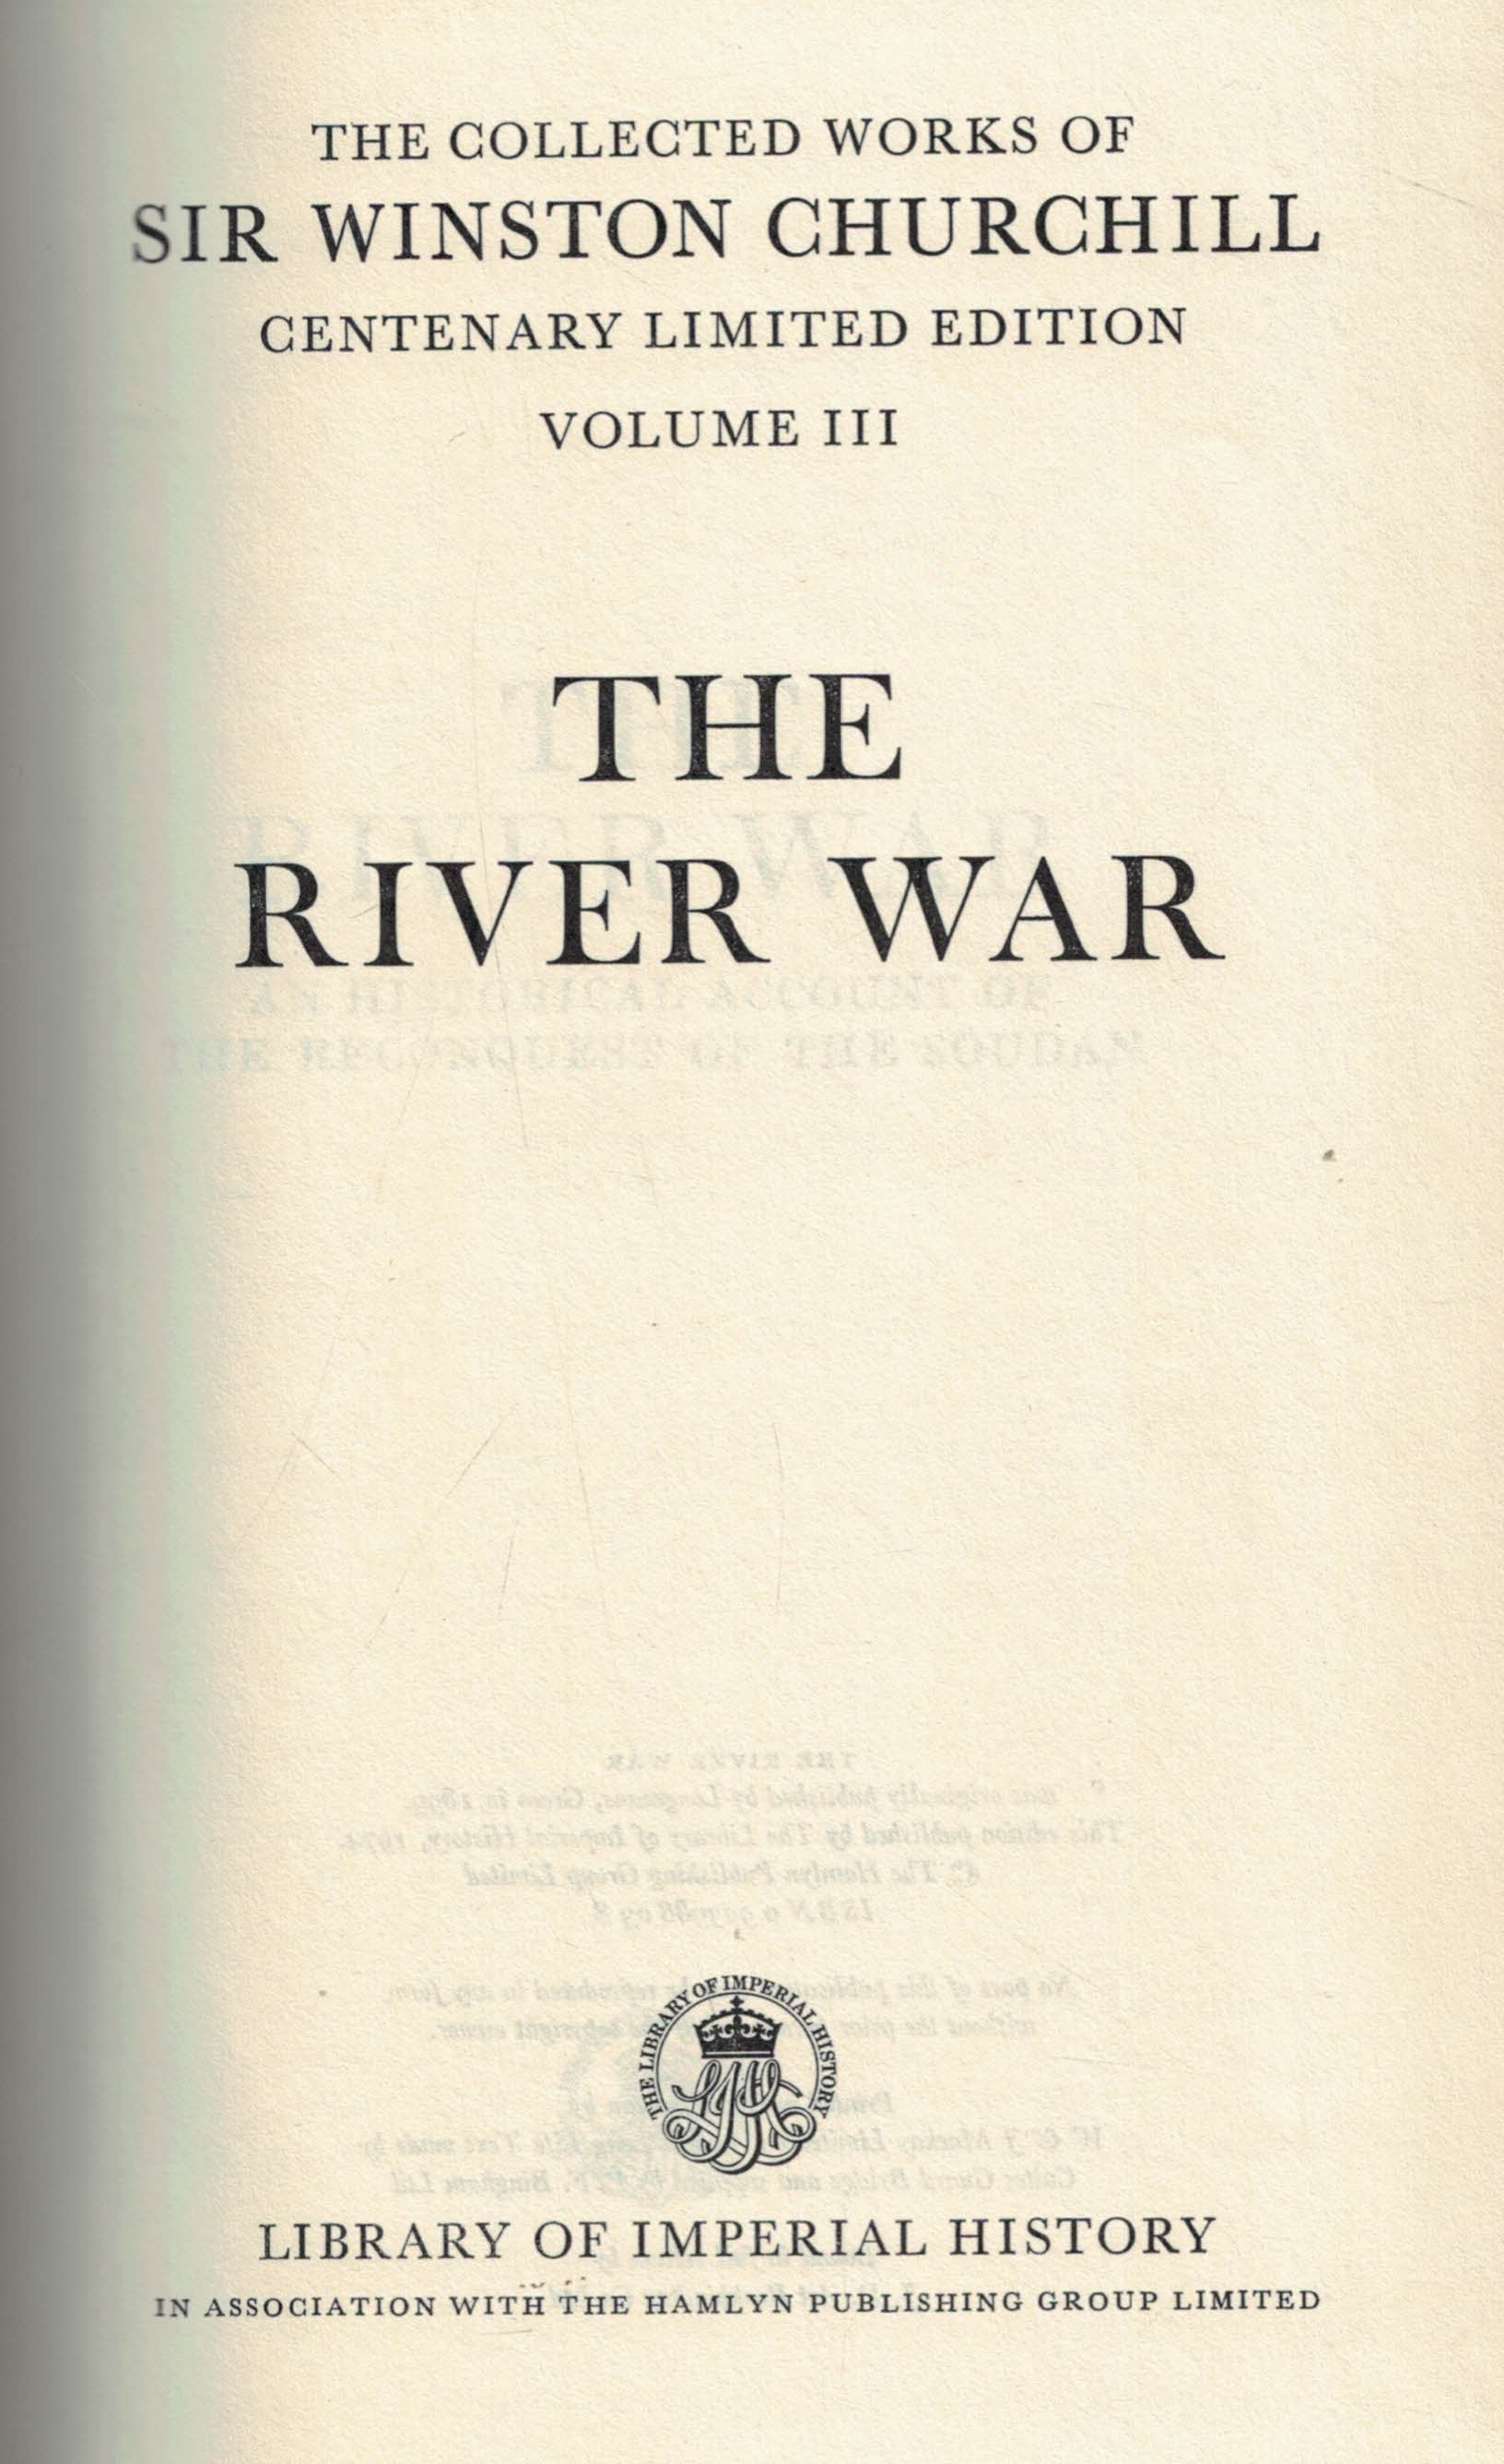 The River War. An Historical Account of the Reconquest of the Soudan. Centenary Limited Edition volume III.